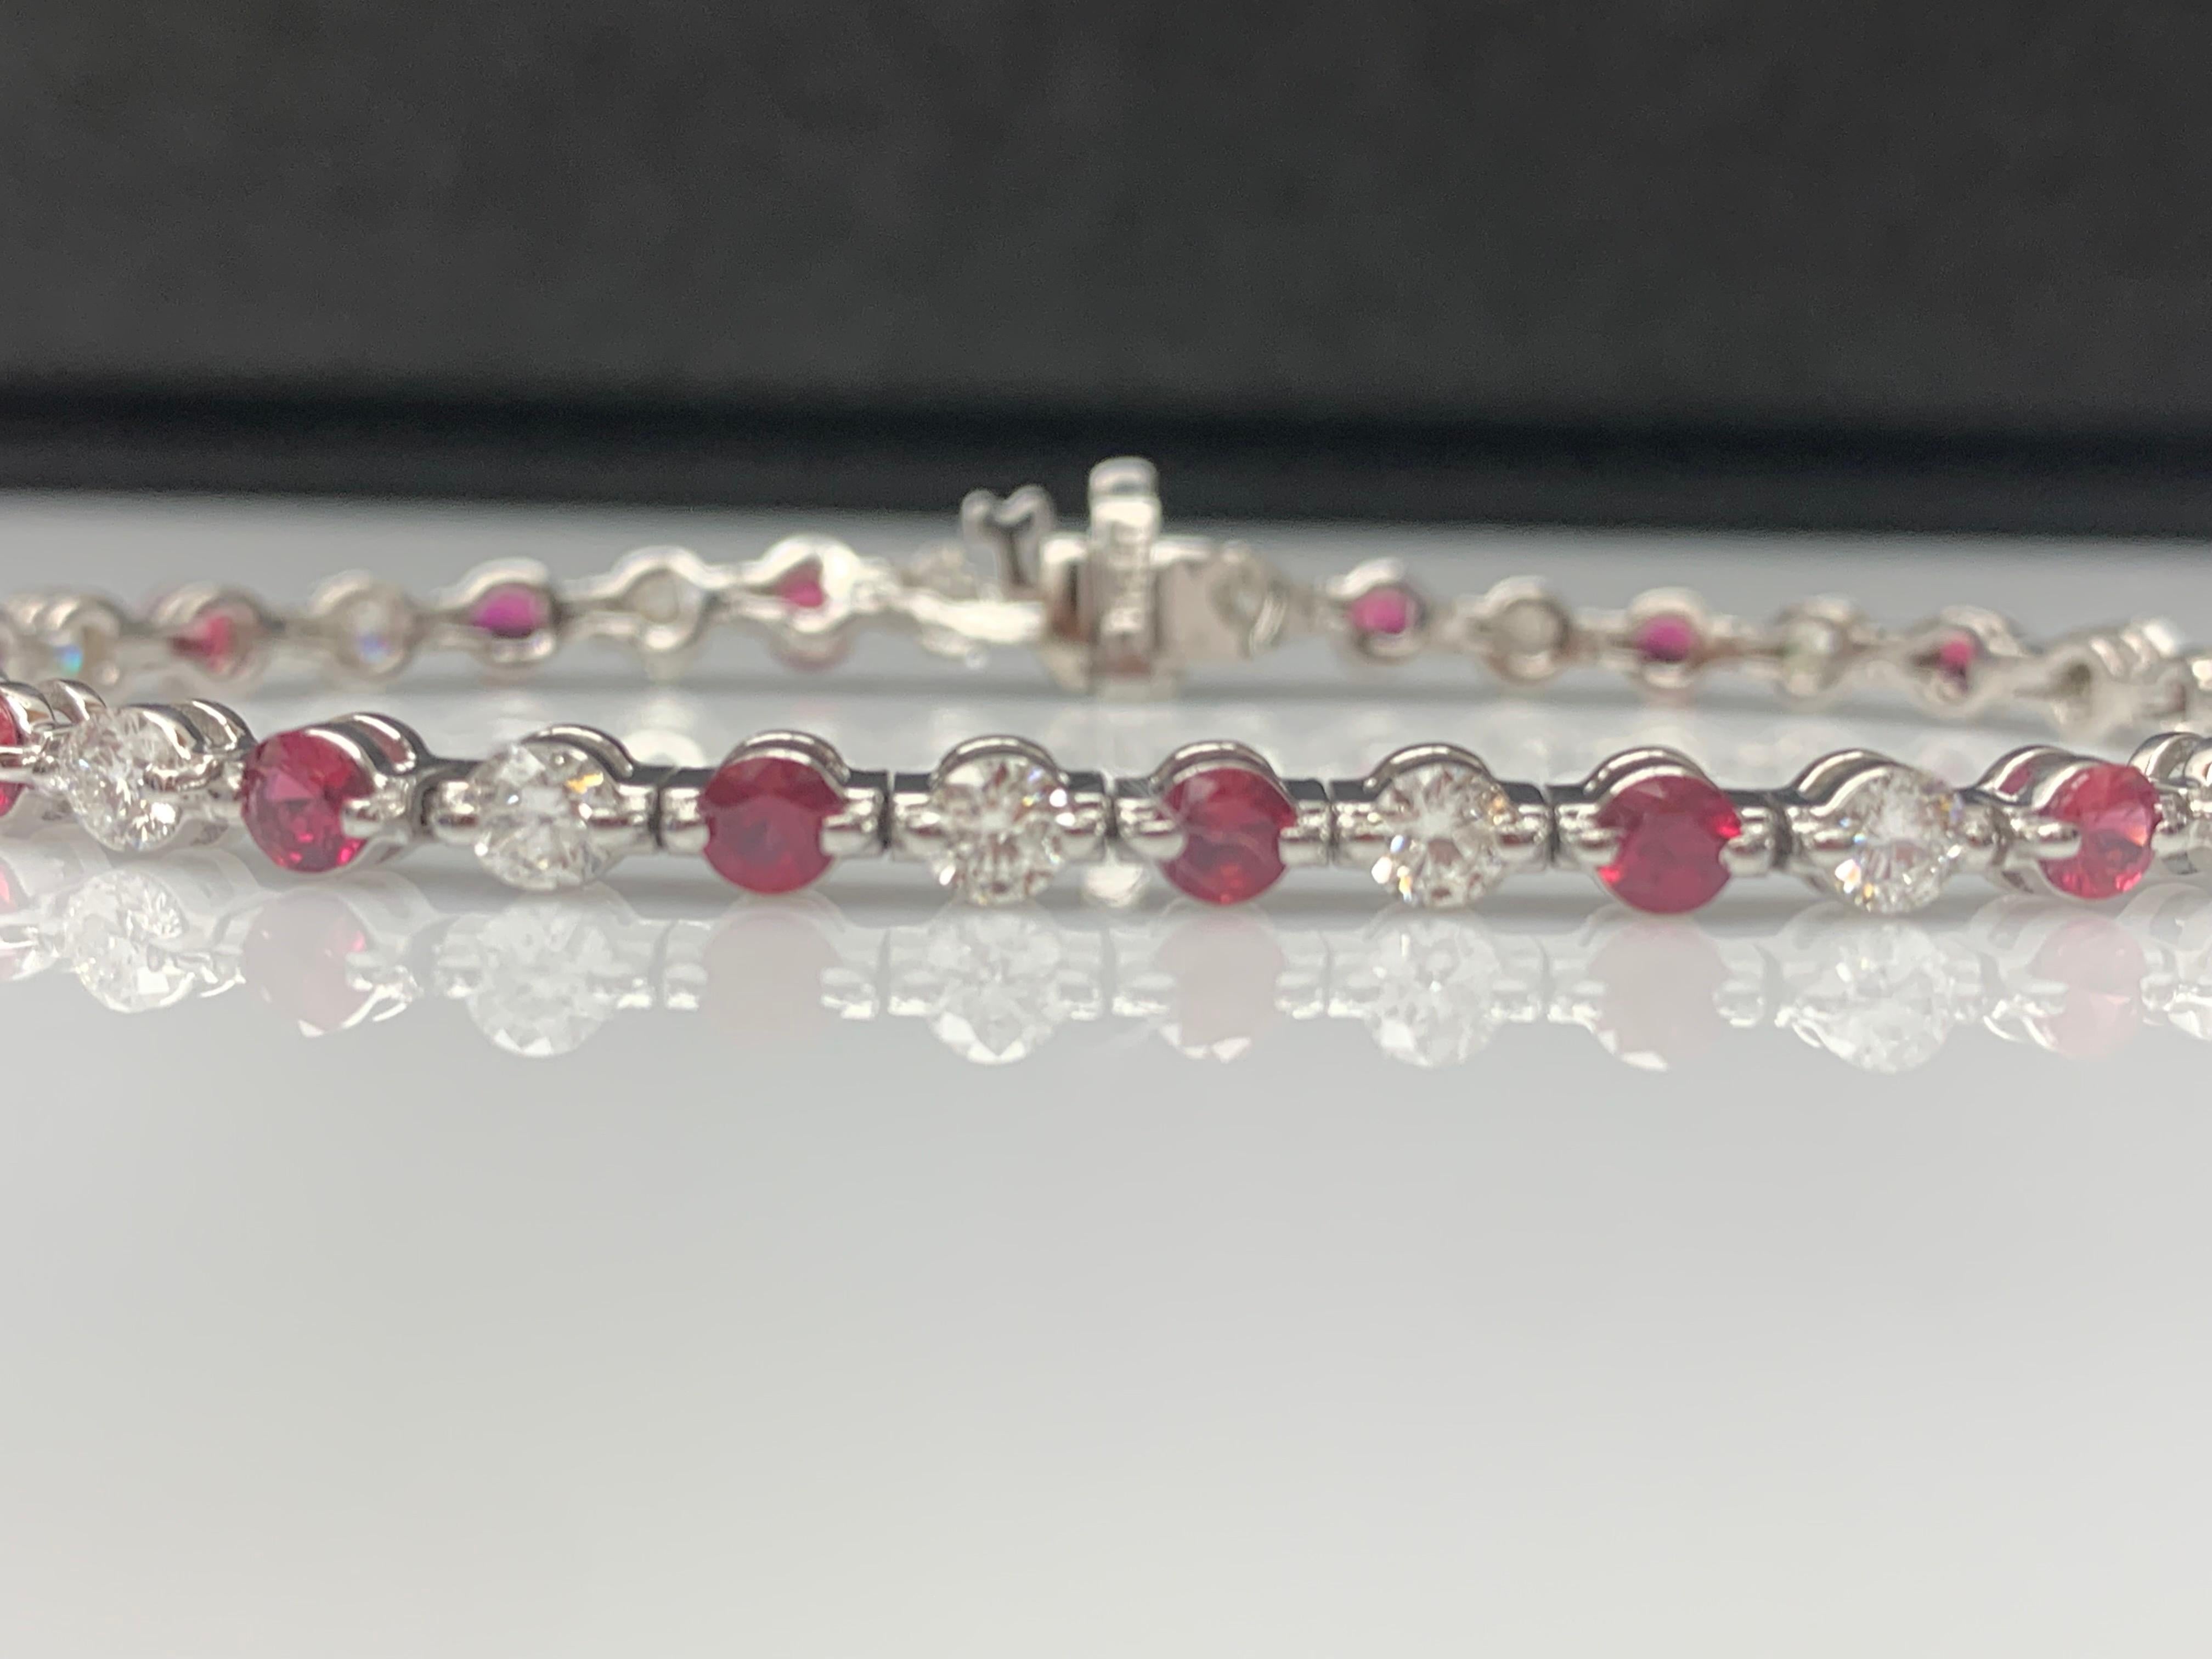 A stunning bracelet set with 18 Vibrant Red Rubies weighing 3.03 carat total. Alternating these rubies are 18 sparkling brilliant-cut round diamonds weighing 2.88 carats in total. Set in polished 14k white gold. Double lock mechanism for maximum